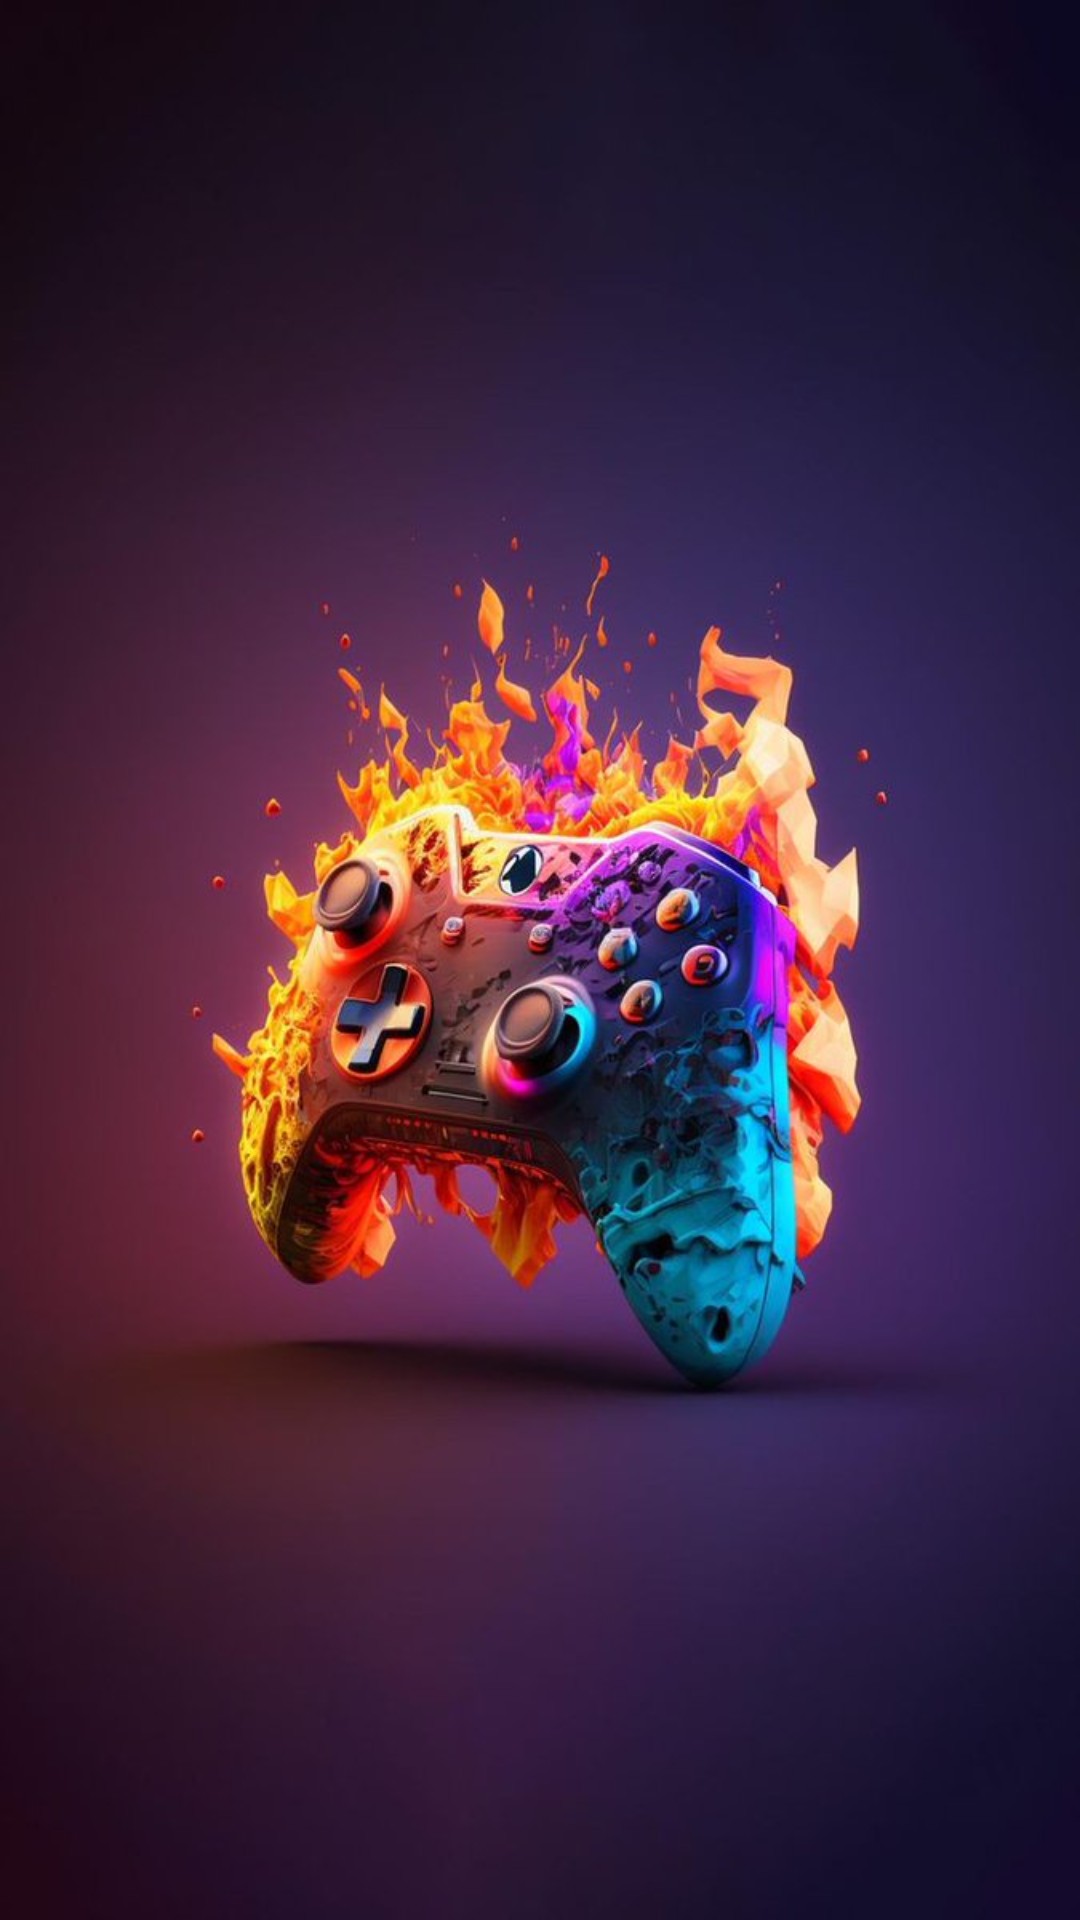 Game Controllers Wallpaper Images